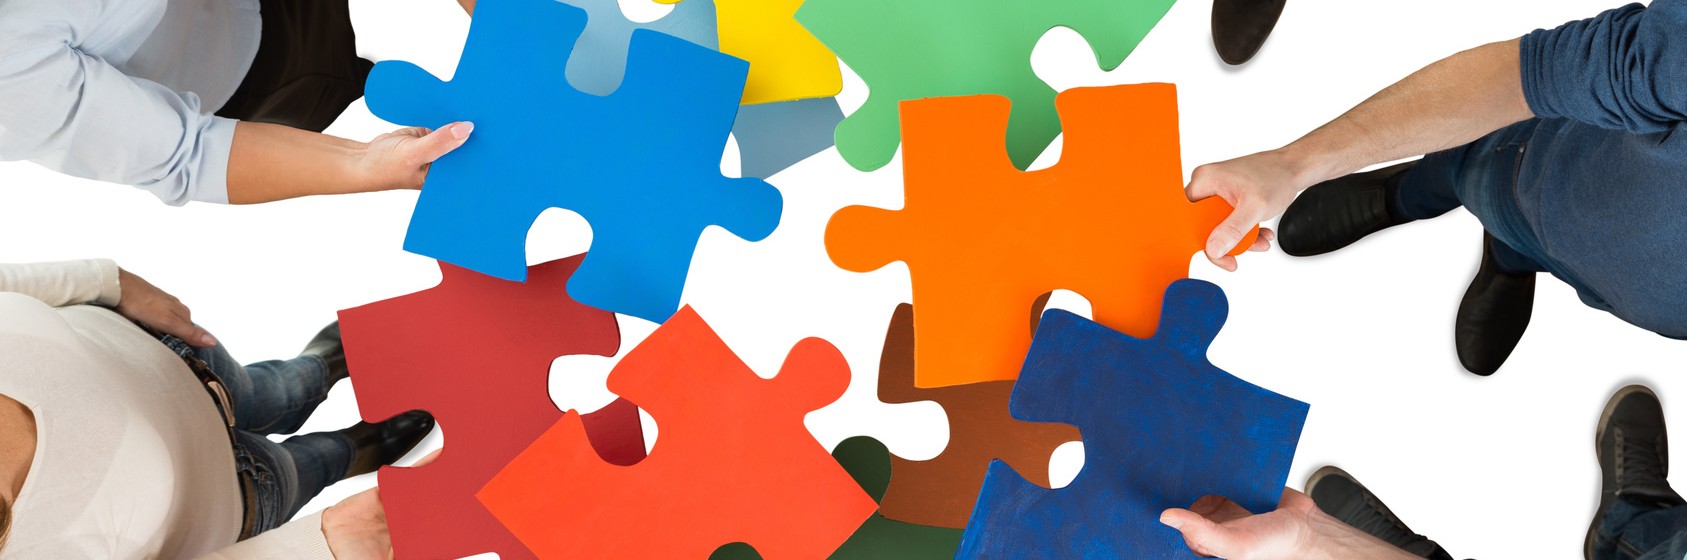 Directly above shot of people holding colorful puzzle pieces in huddle against white background